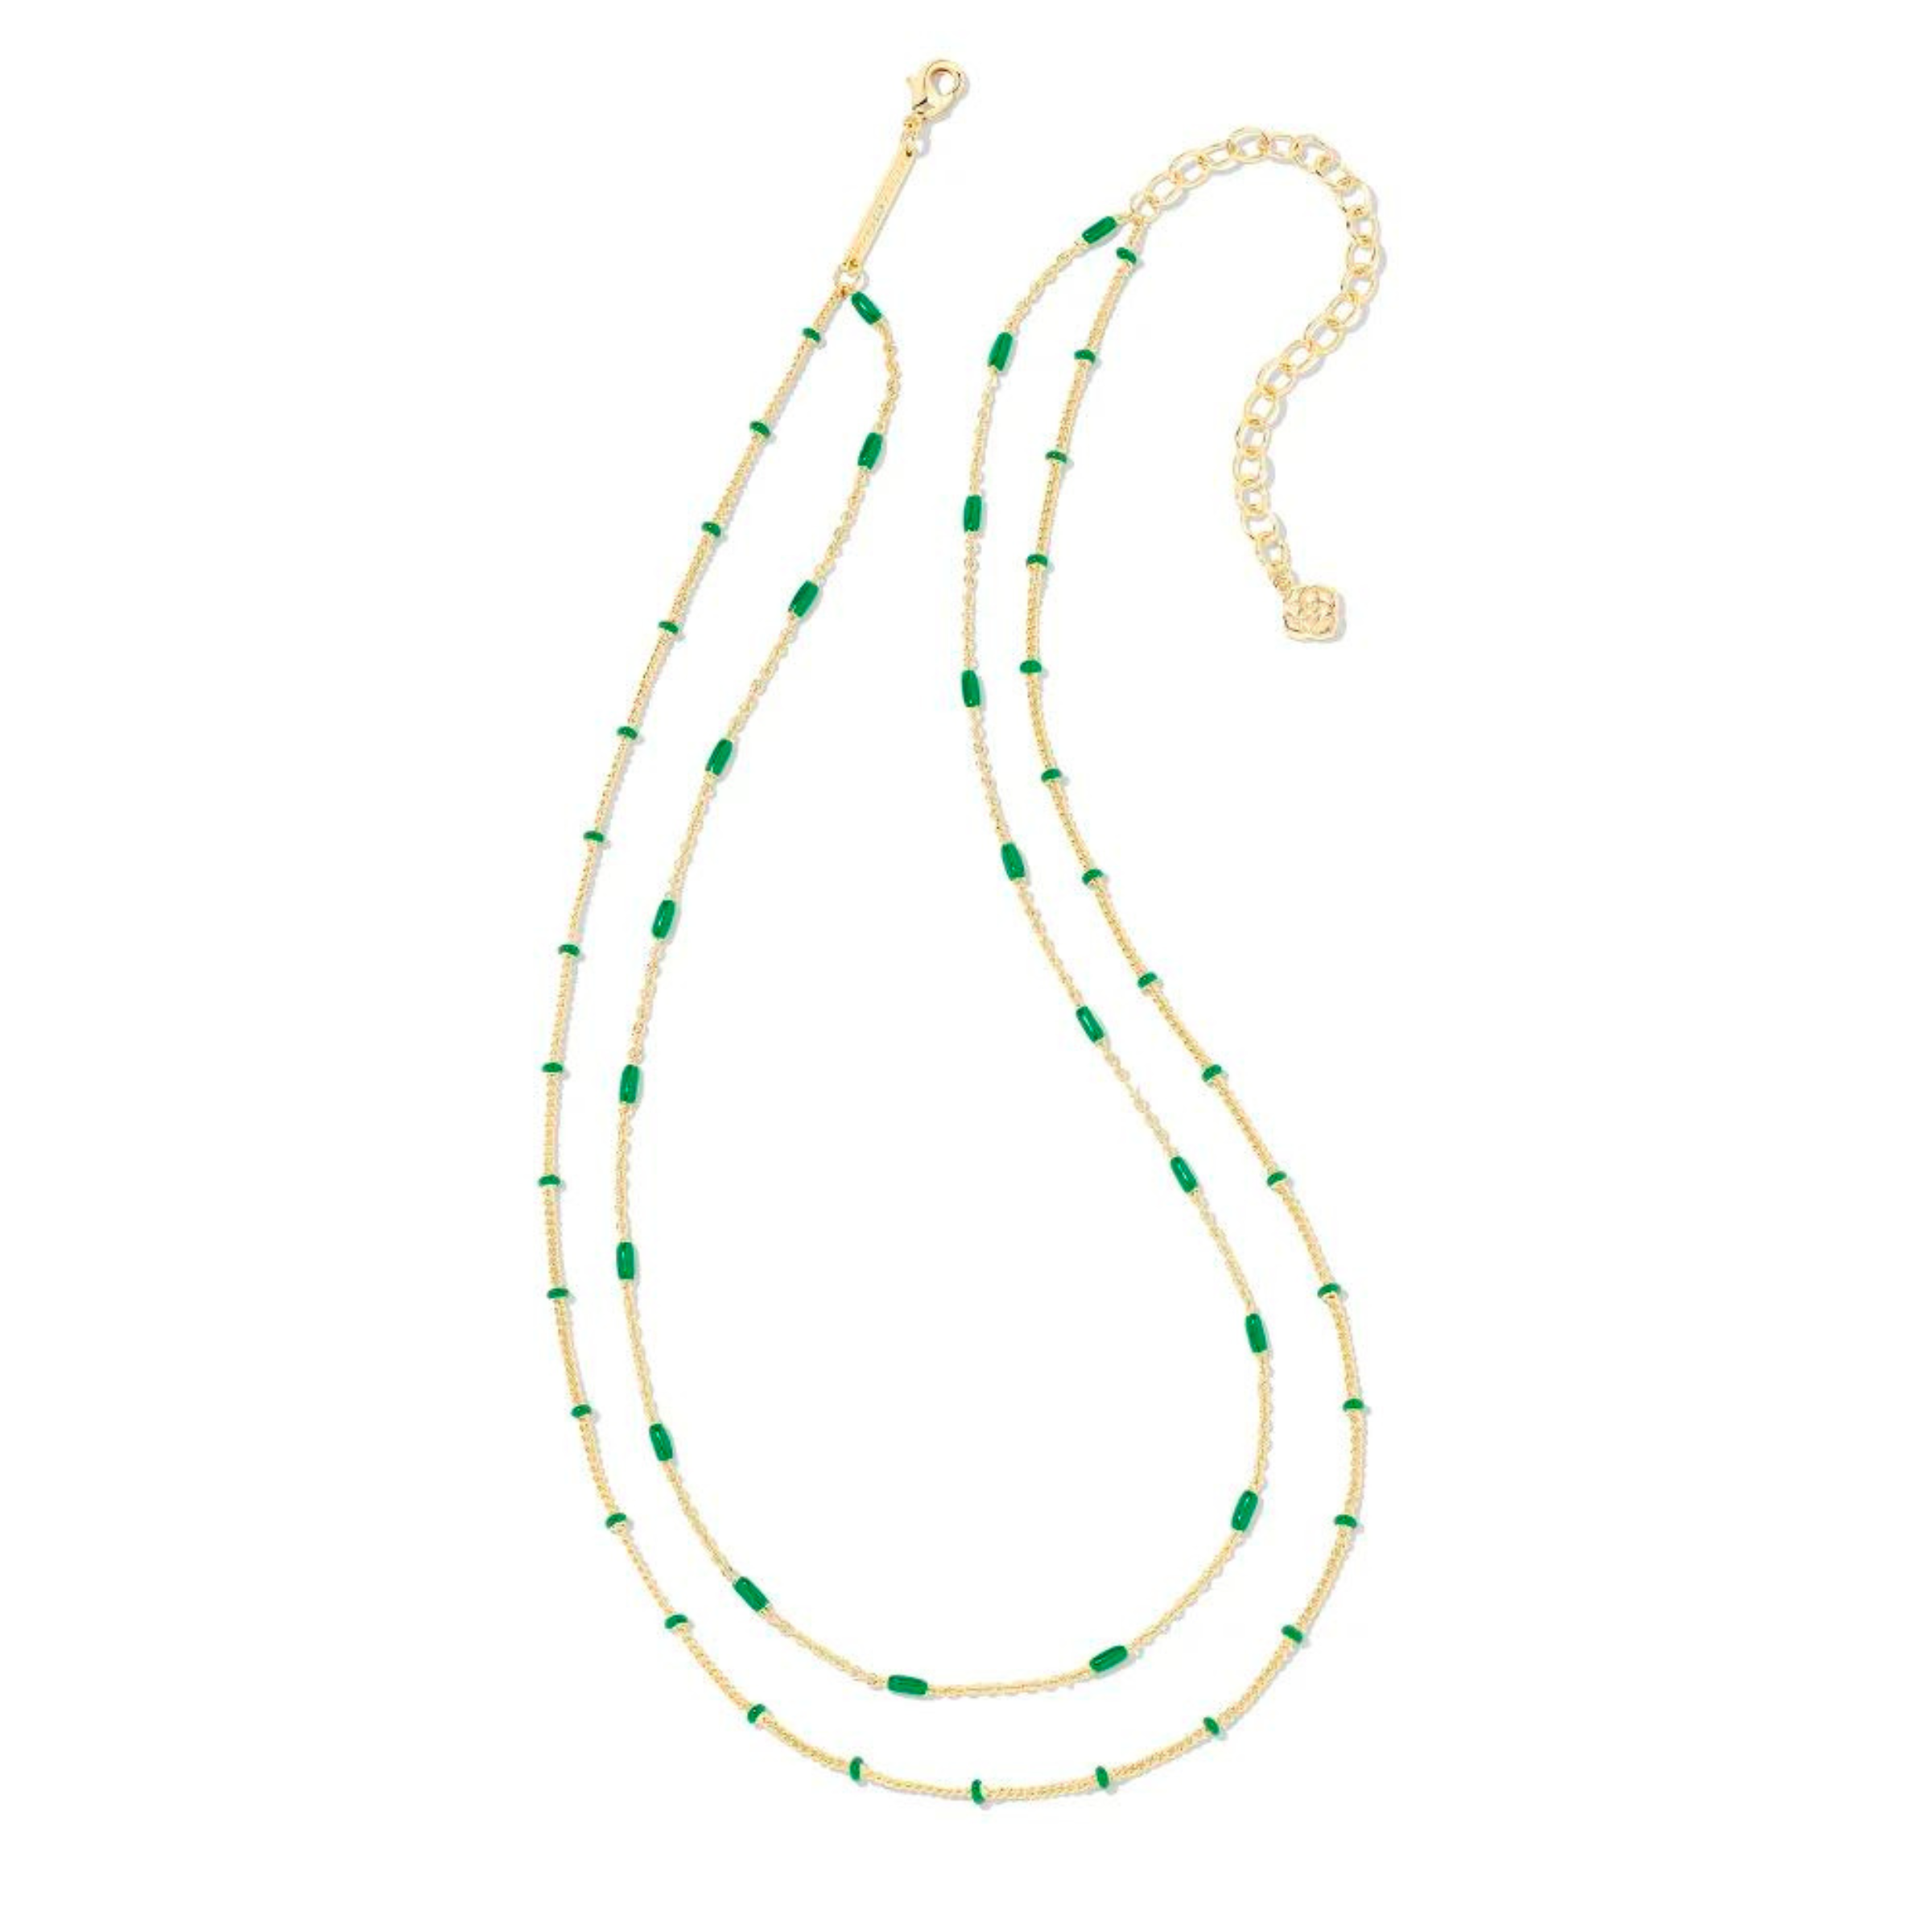 Two strand, adjustable chain necklace with emerald enamel spacers. This necklace is pictured on a white background. 